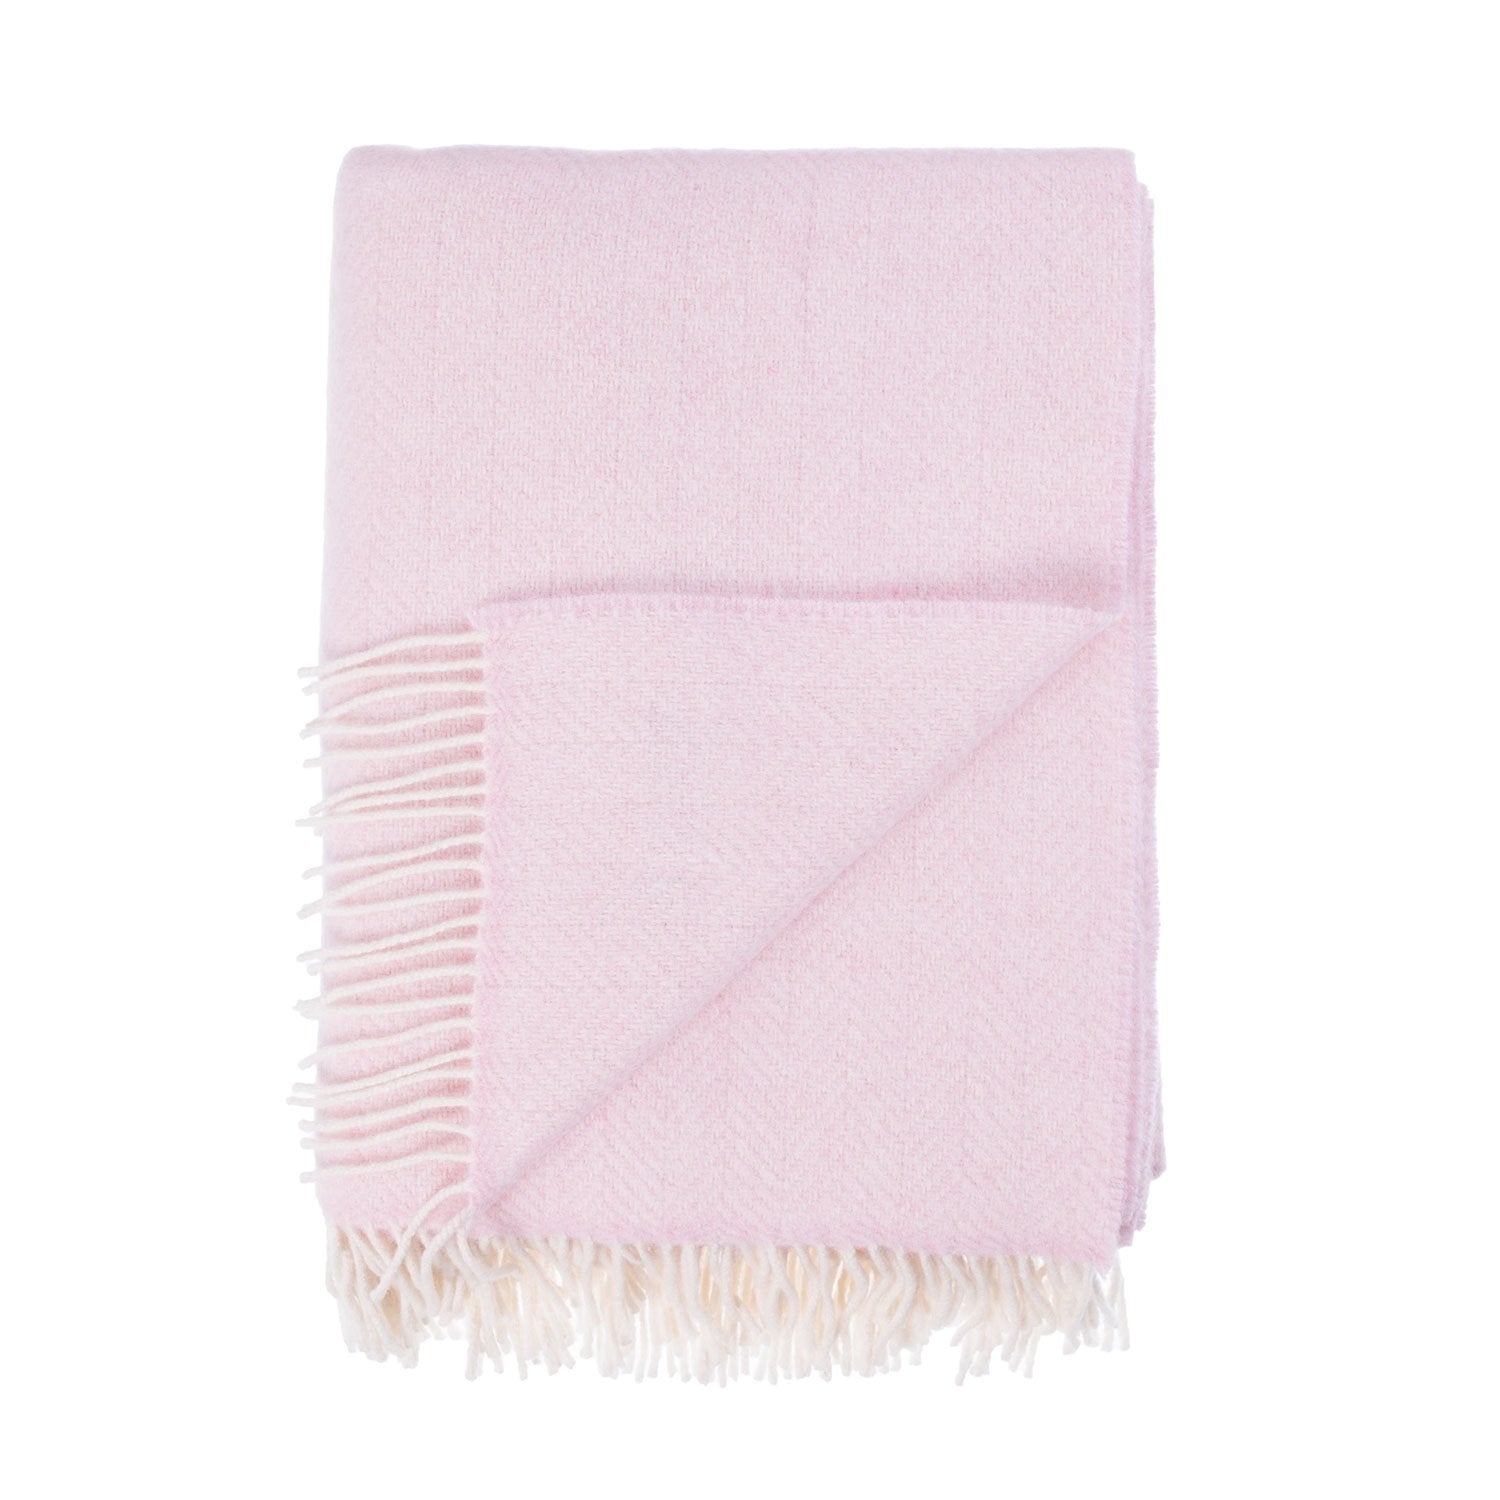 Pale Pink Cashmere Blend Throw Pink Wool Throw The Wool Company